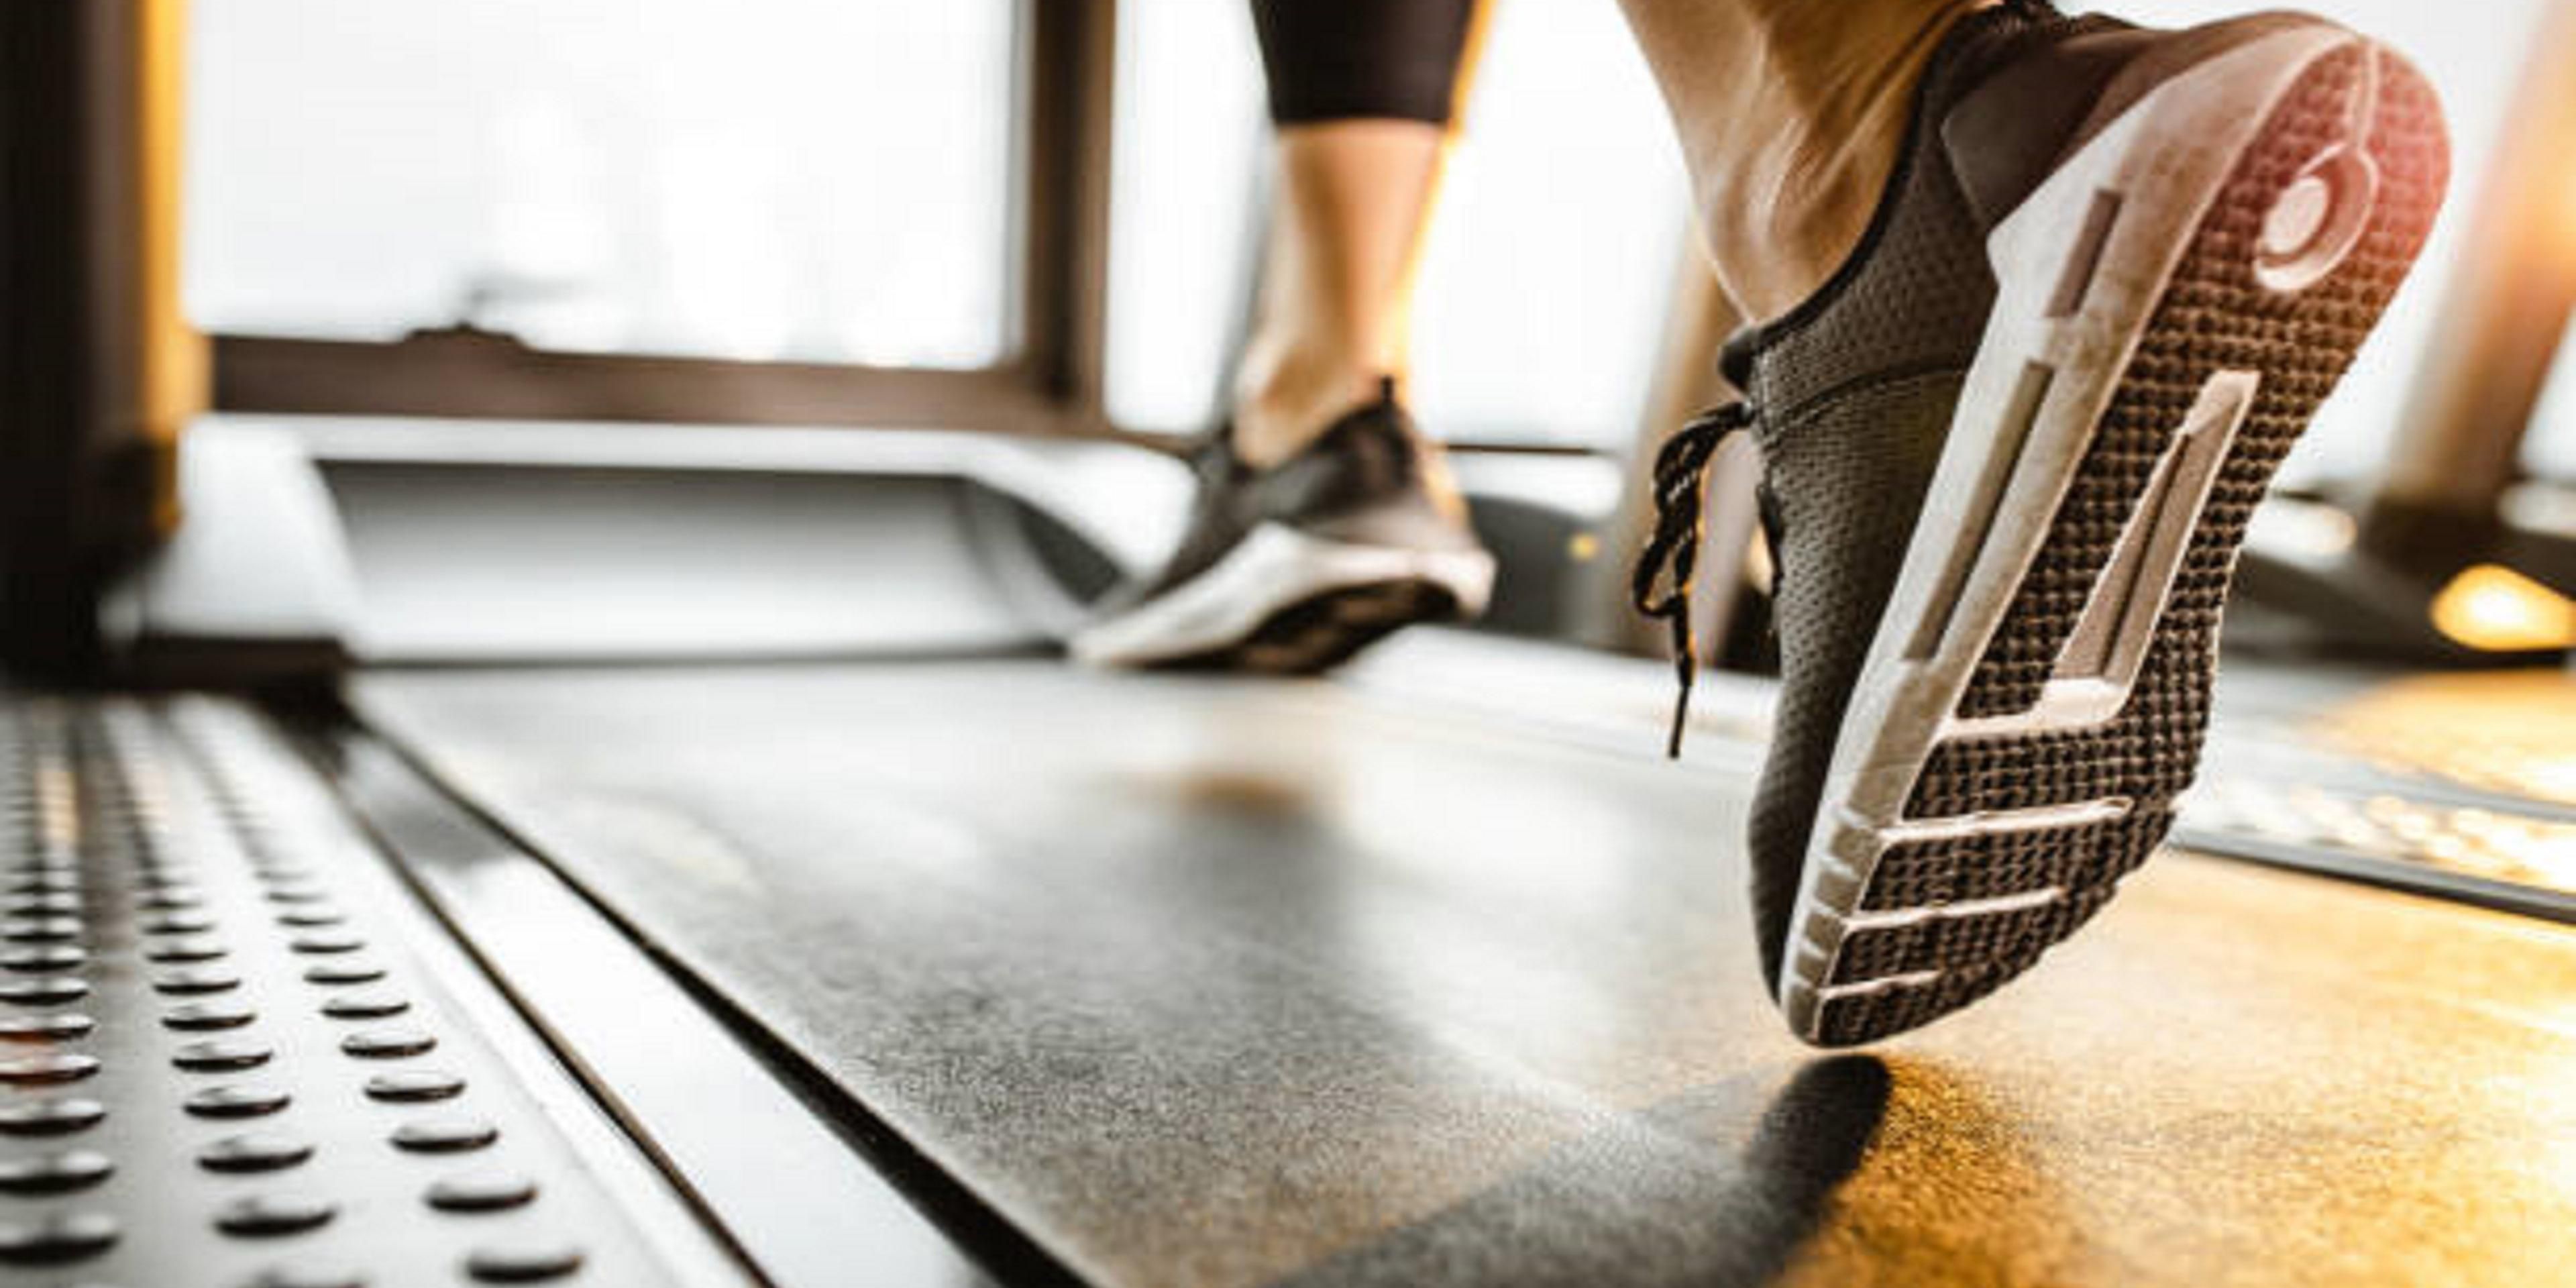 Get your sweat on in our complimentary, fully equipped Fitness Center with Free weights, Treadmill, Stationary Bicycle and a elliptical machine.  Open 24 hours.